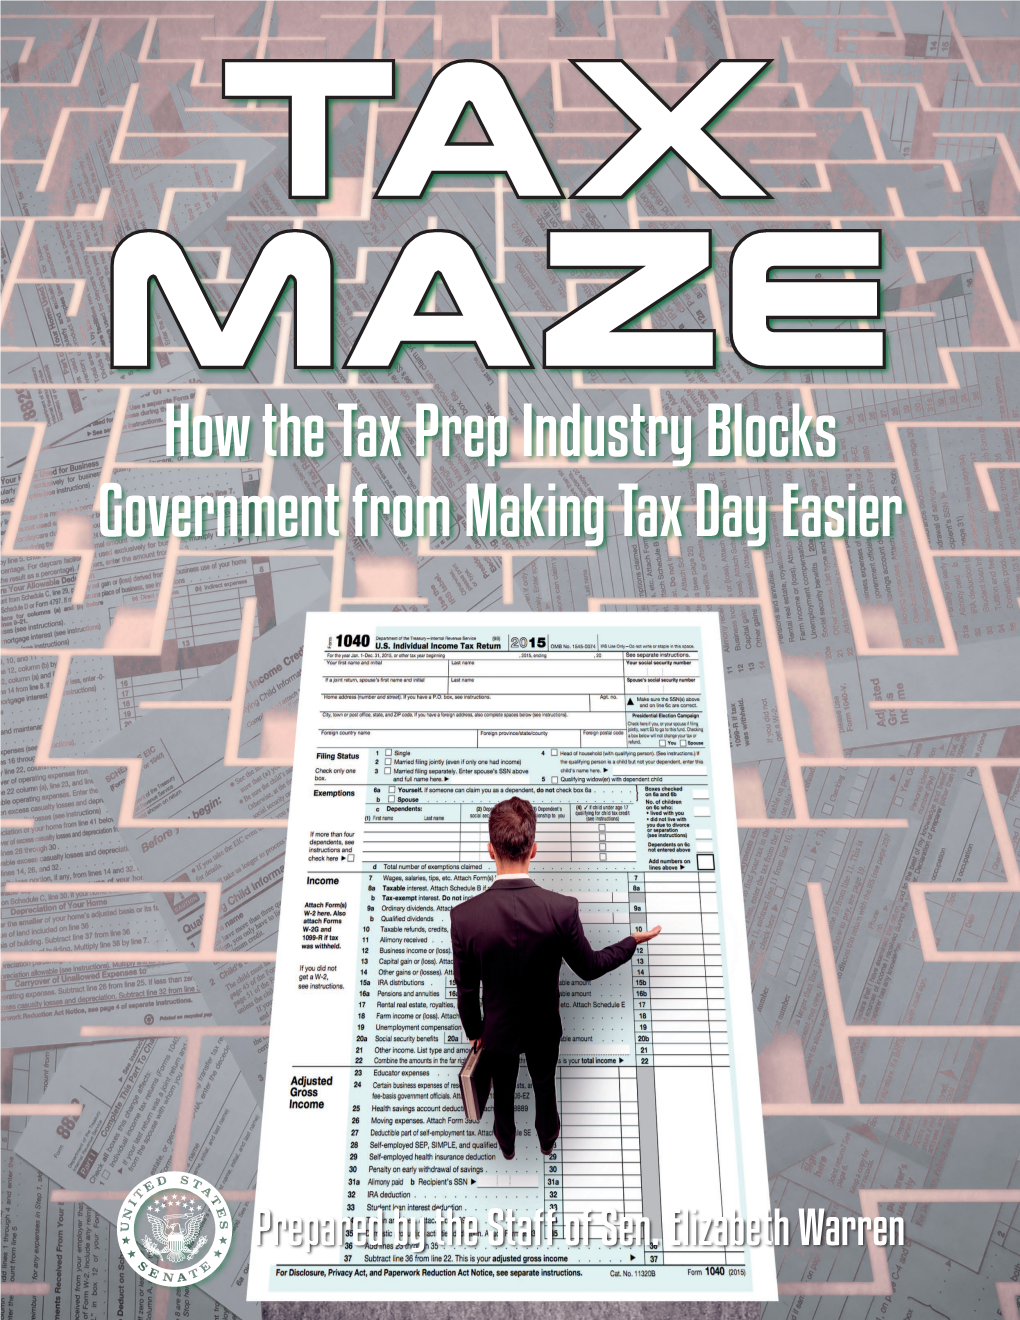 Tax Maze: How the Tax Prep Industry Blocks Government from Making Tax Day Easier